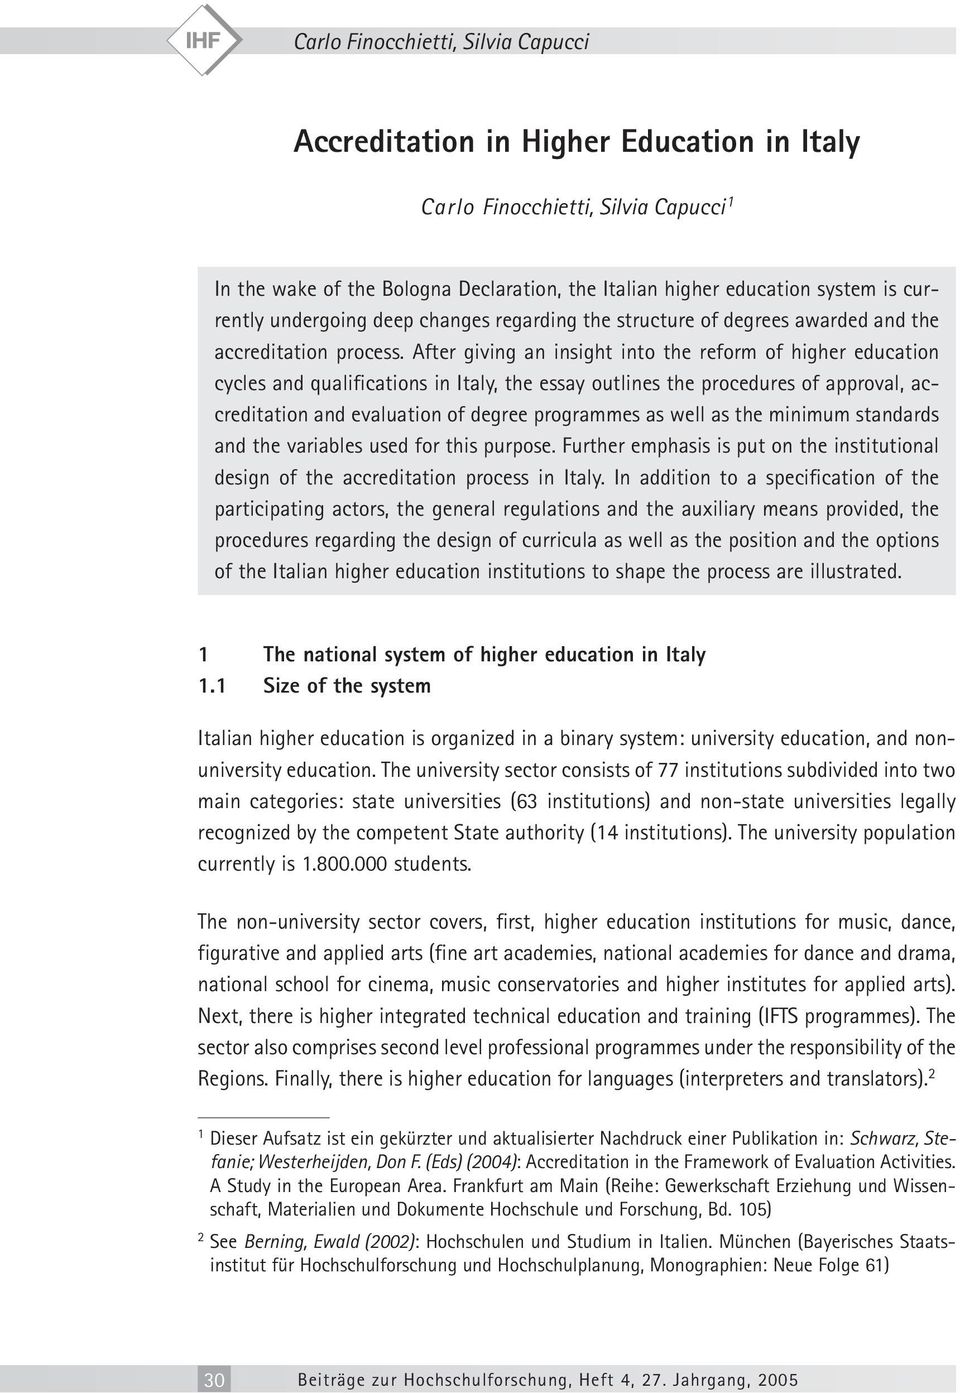 After giving an insight into the reform of higher education cycles and qualifications in Italy, the essay outlines the procedures of approval, accreditation and evaluation of degree programmes as